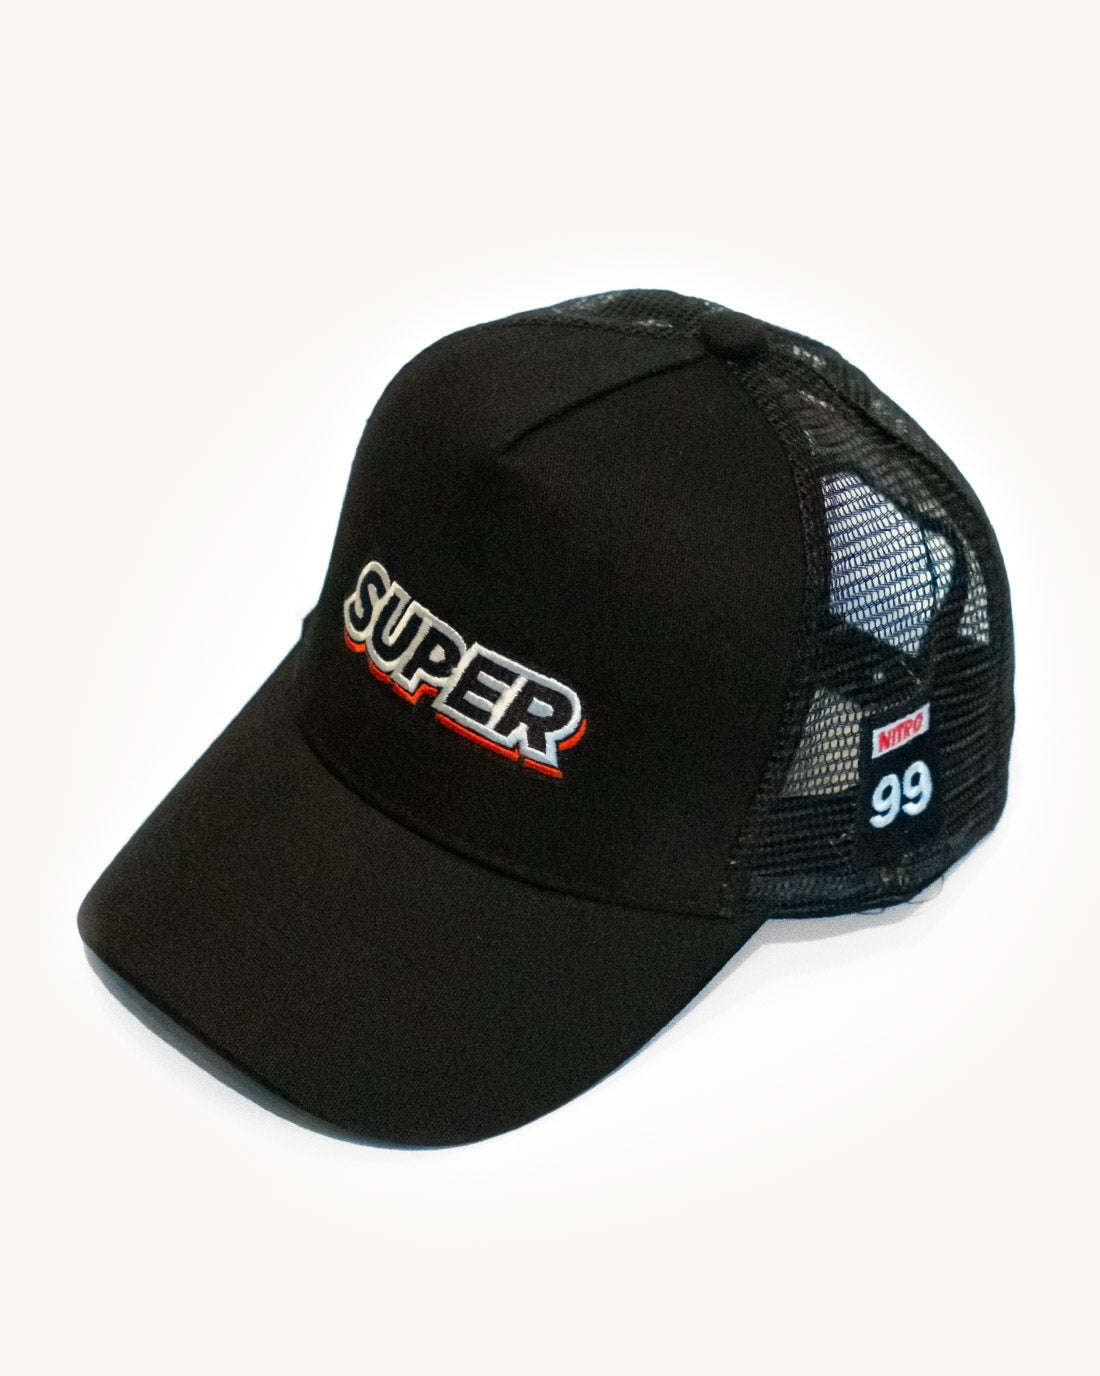 Front side of a super black mesh snapback hat with cool patches.